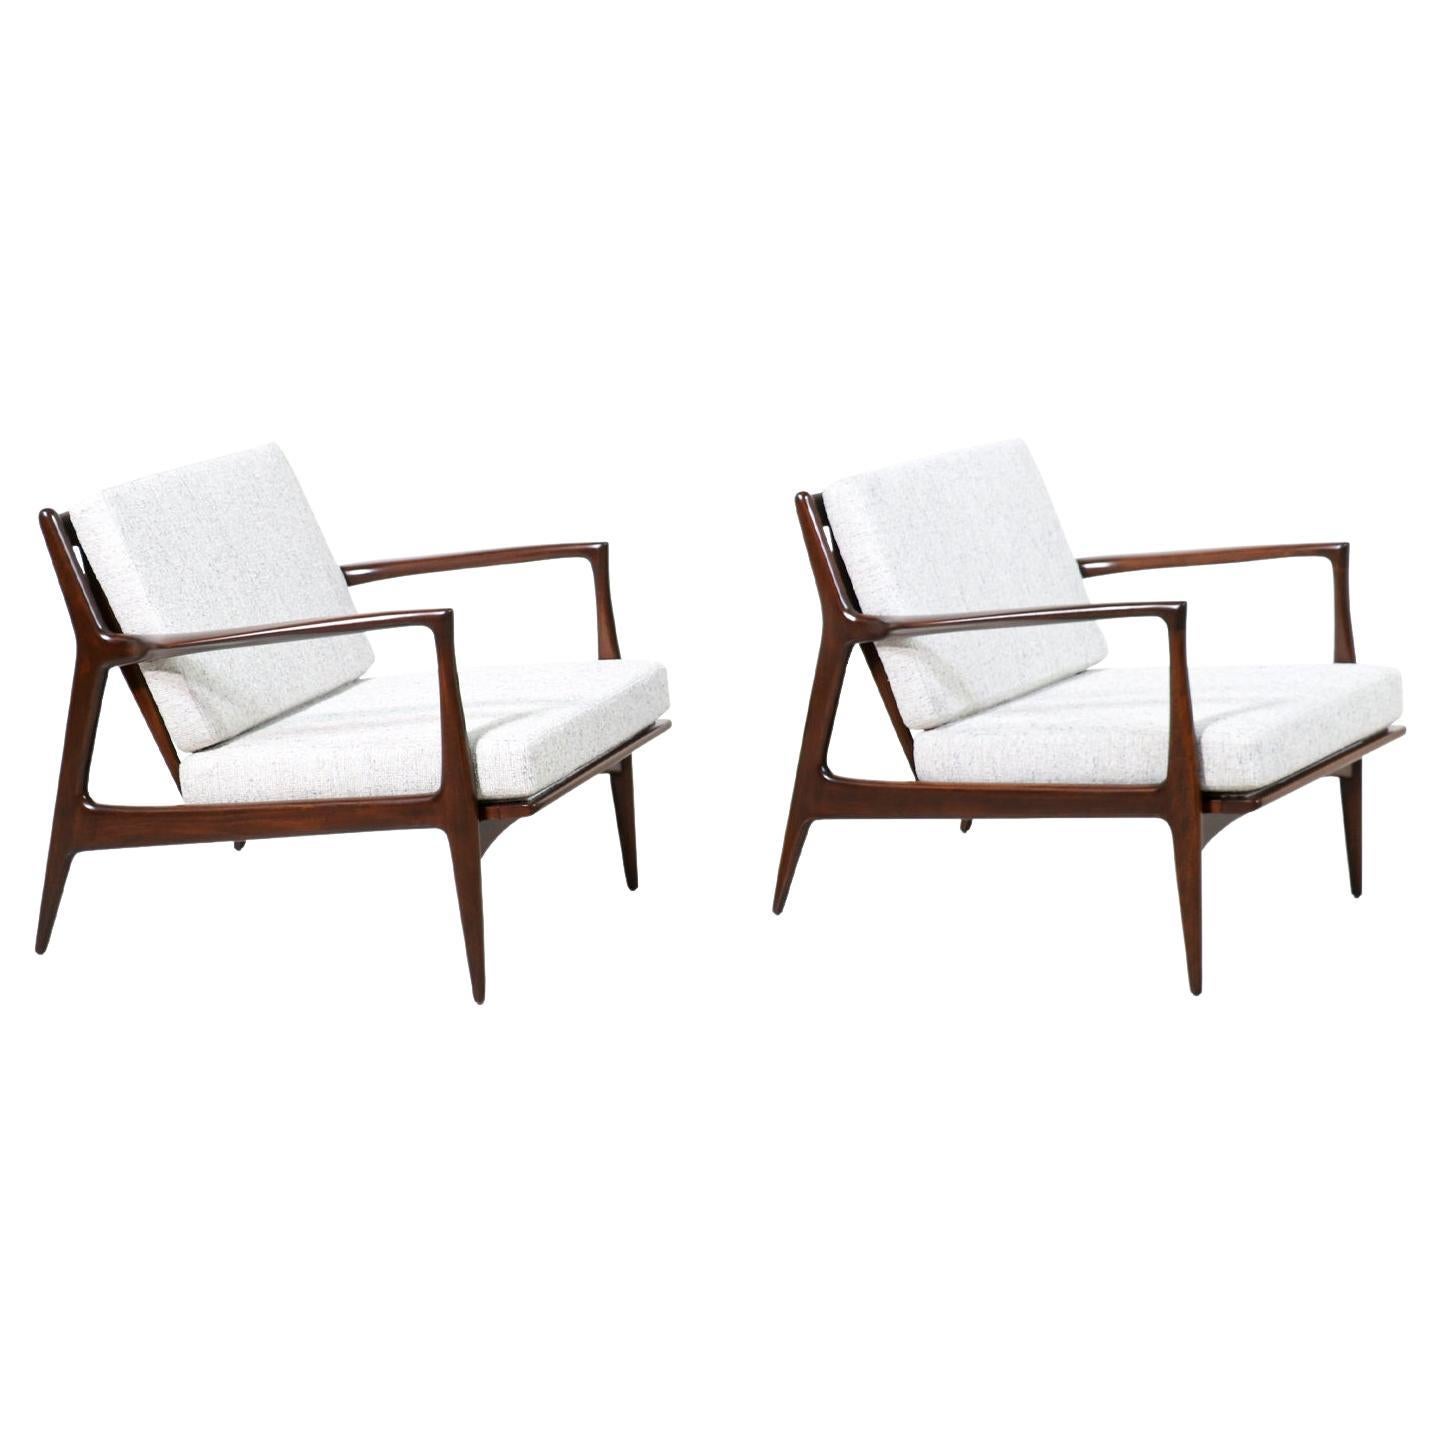 Pair of Danish Modern Sculpted Lounge Chairs by Ib Kofod-Larsen For Sale